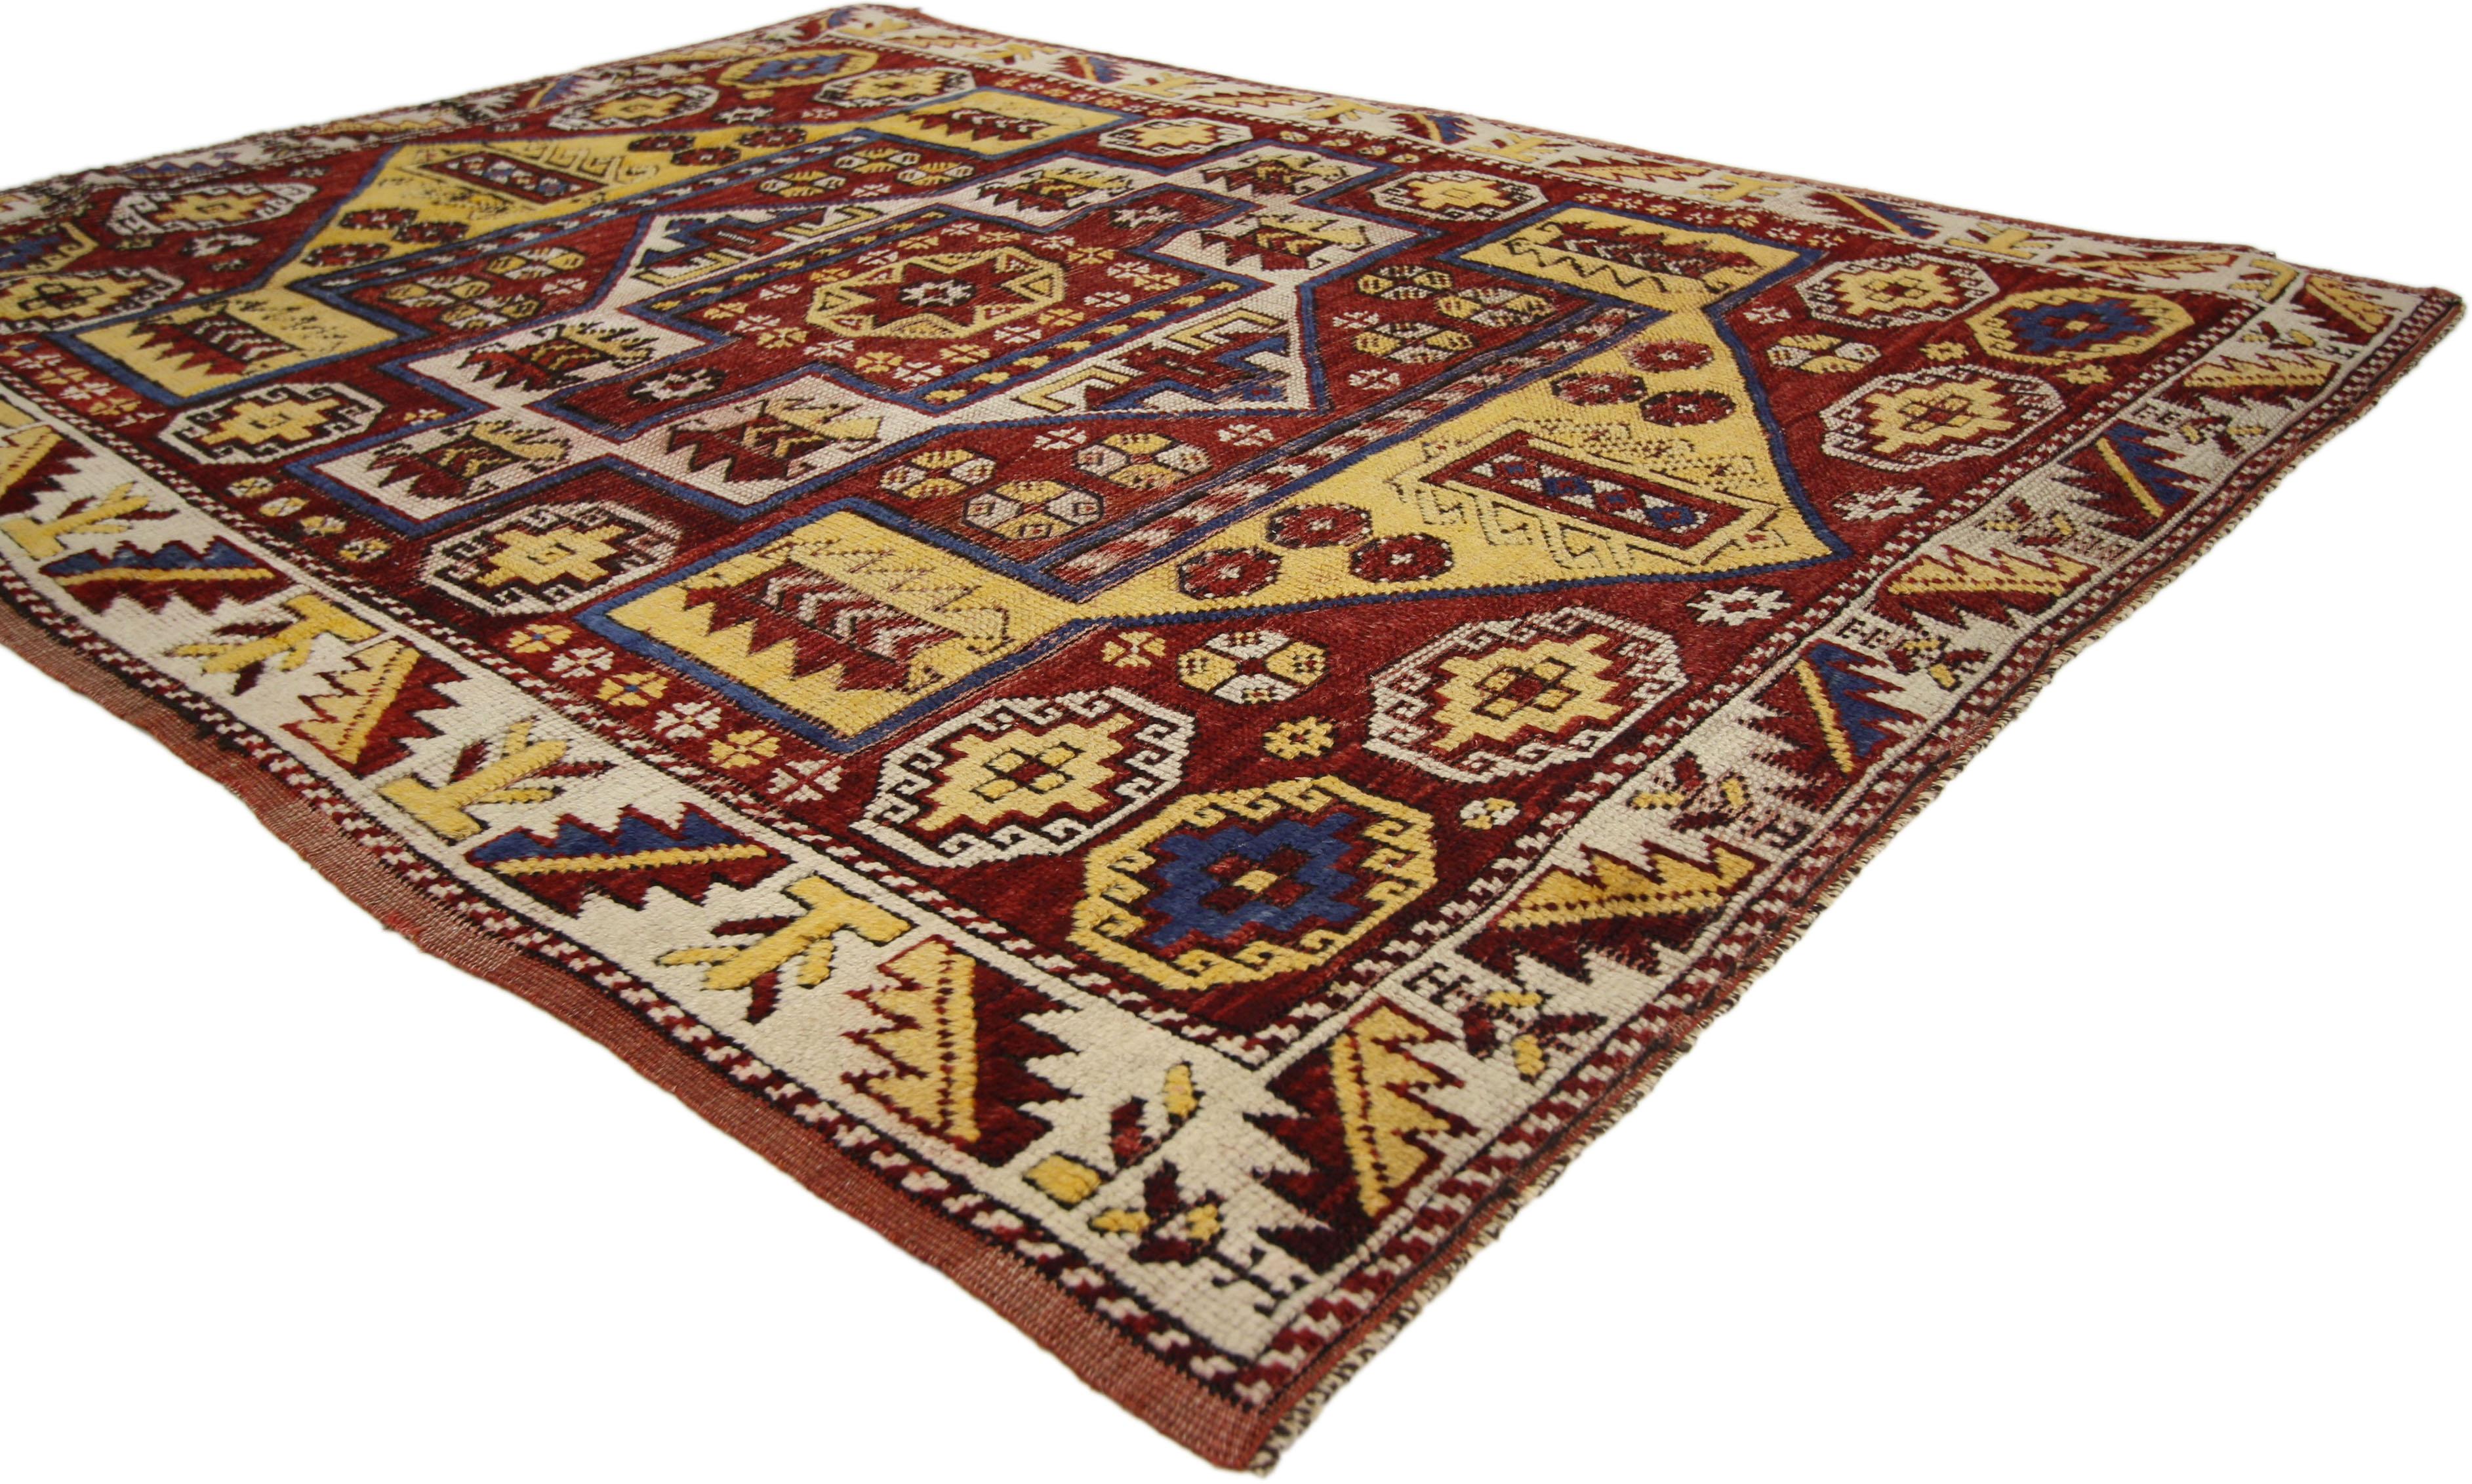 51732, vintage Turkish Oushak accent rug, entry or foyer rug. This vintage Turkish Oushak rug features a modern traditional style. Immersed in Anatolian history and refined colors, this vintage Oushak rug combines simplicity with sophistication.